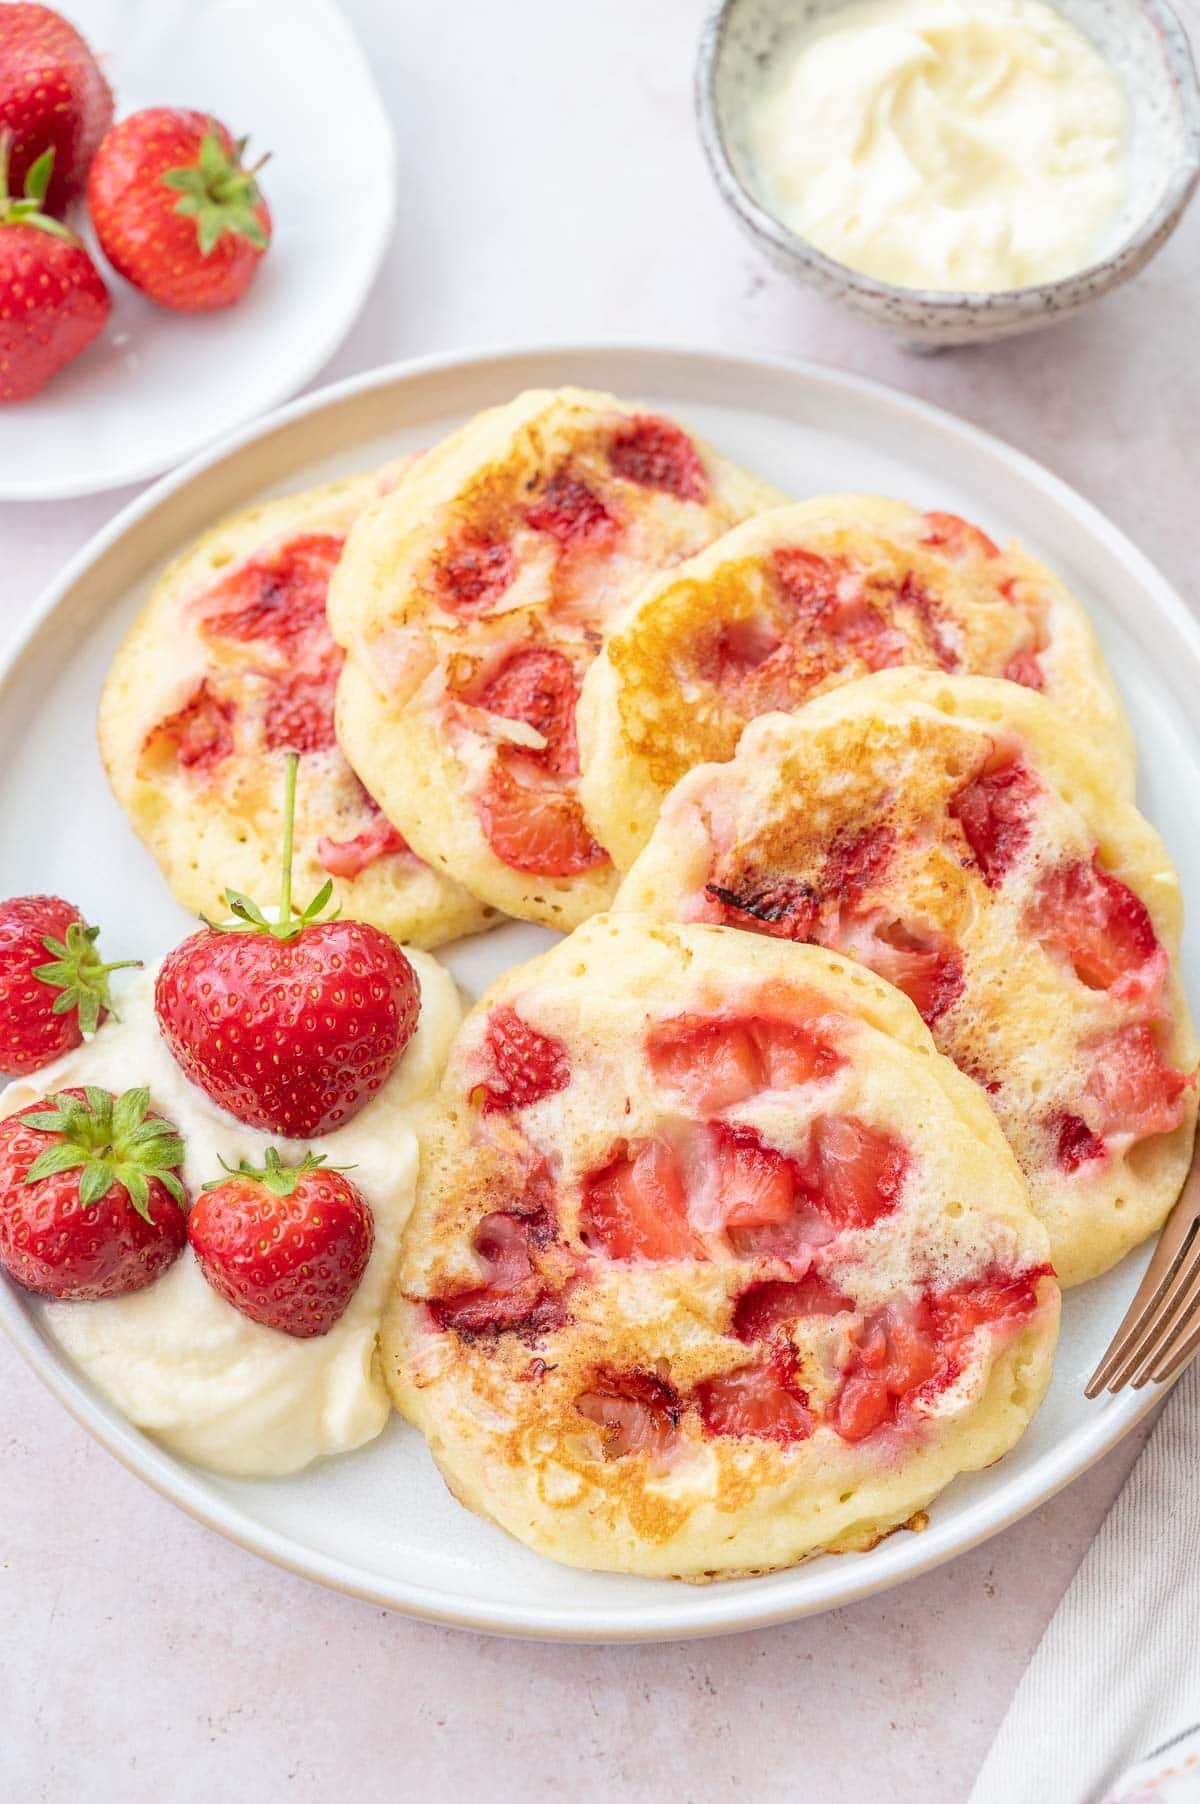 Strawberry pancakes served with whipped cream and strawberries on a white plate.